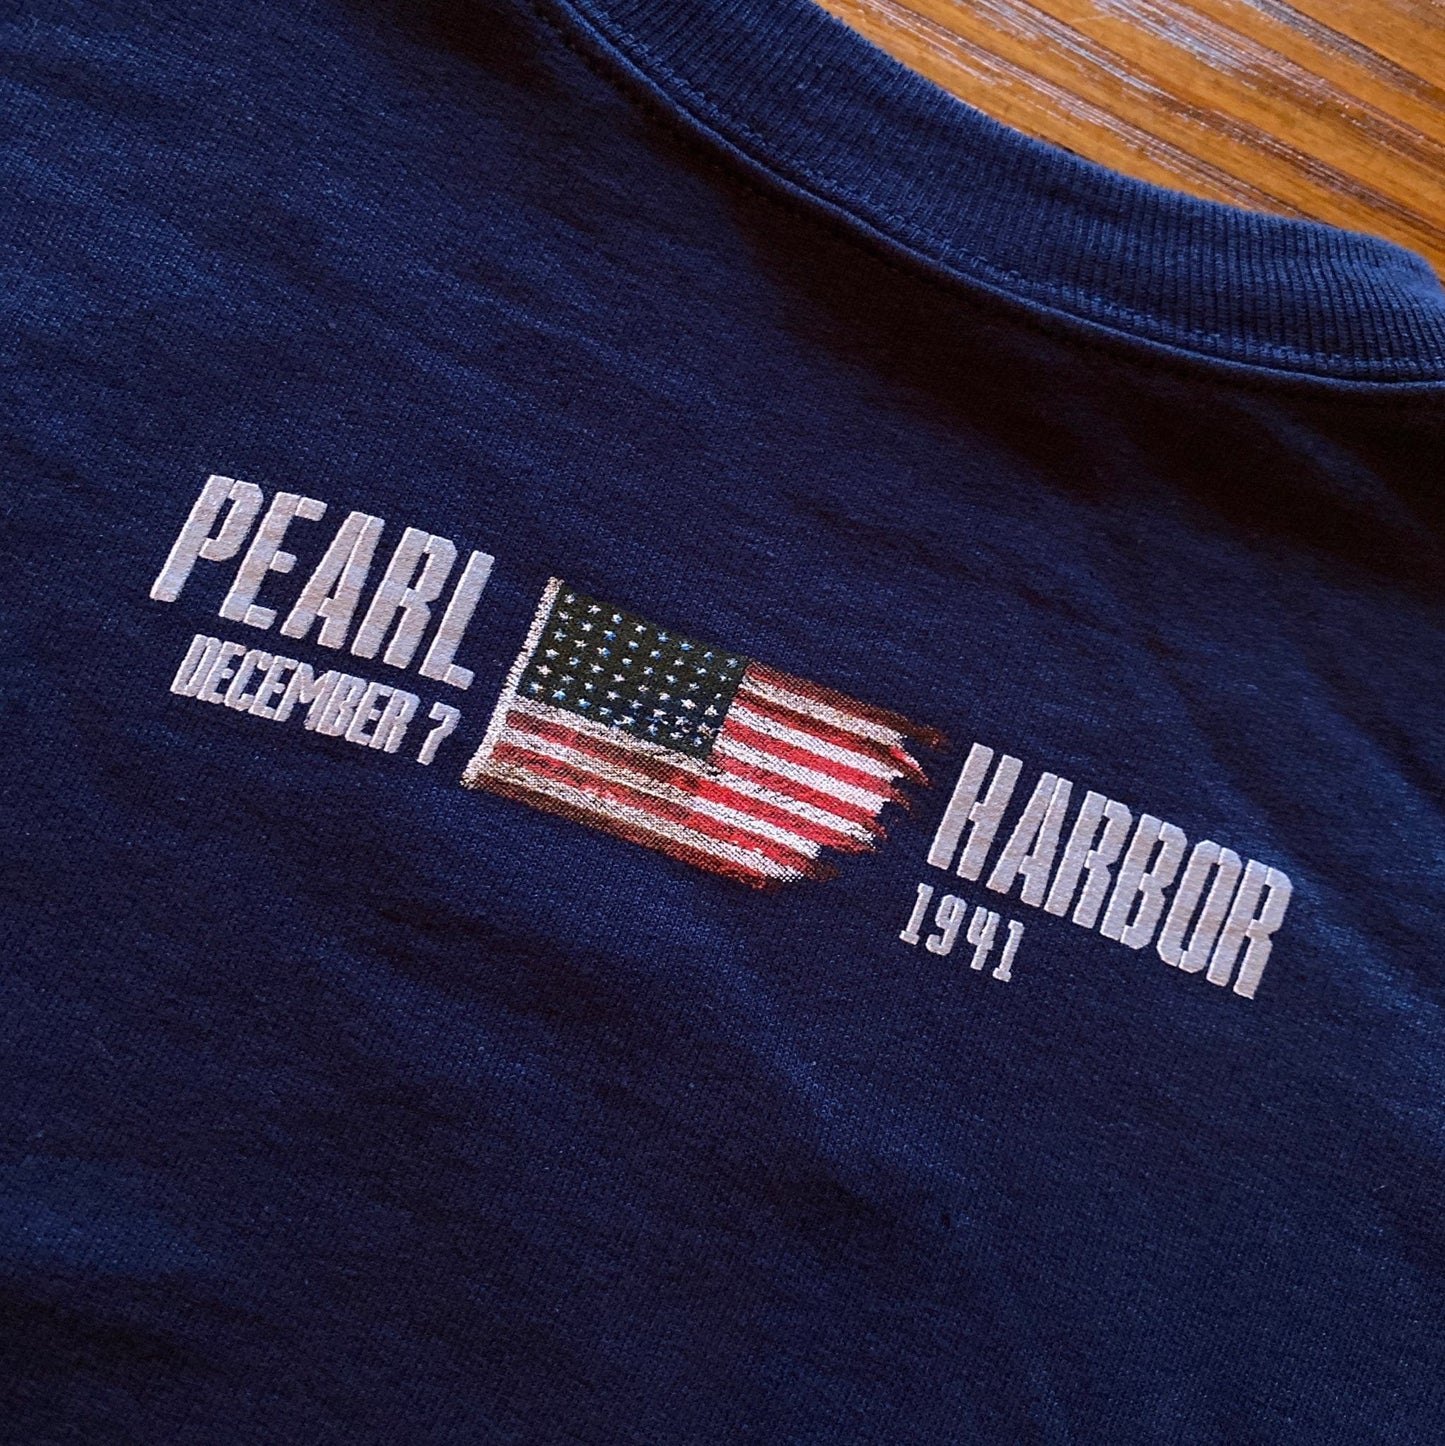 Back  Close-up “History Nerd” Pearl Harbor V-neck shirt with WWII sailor and historic flag from the History List Store